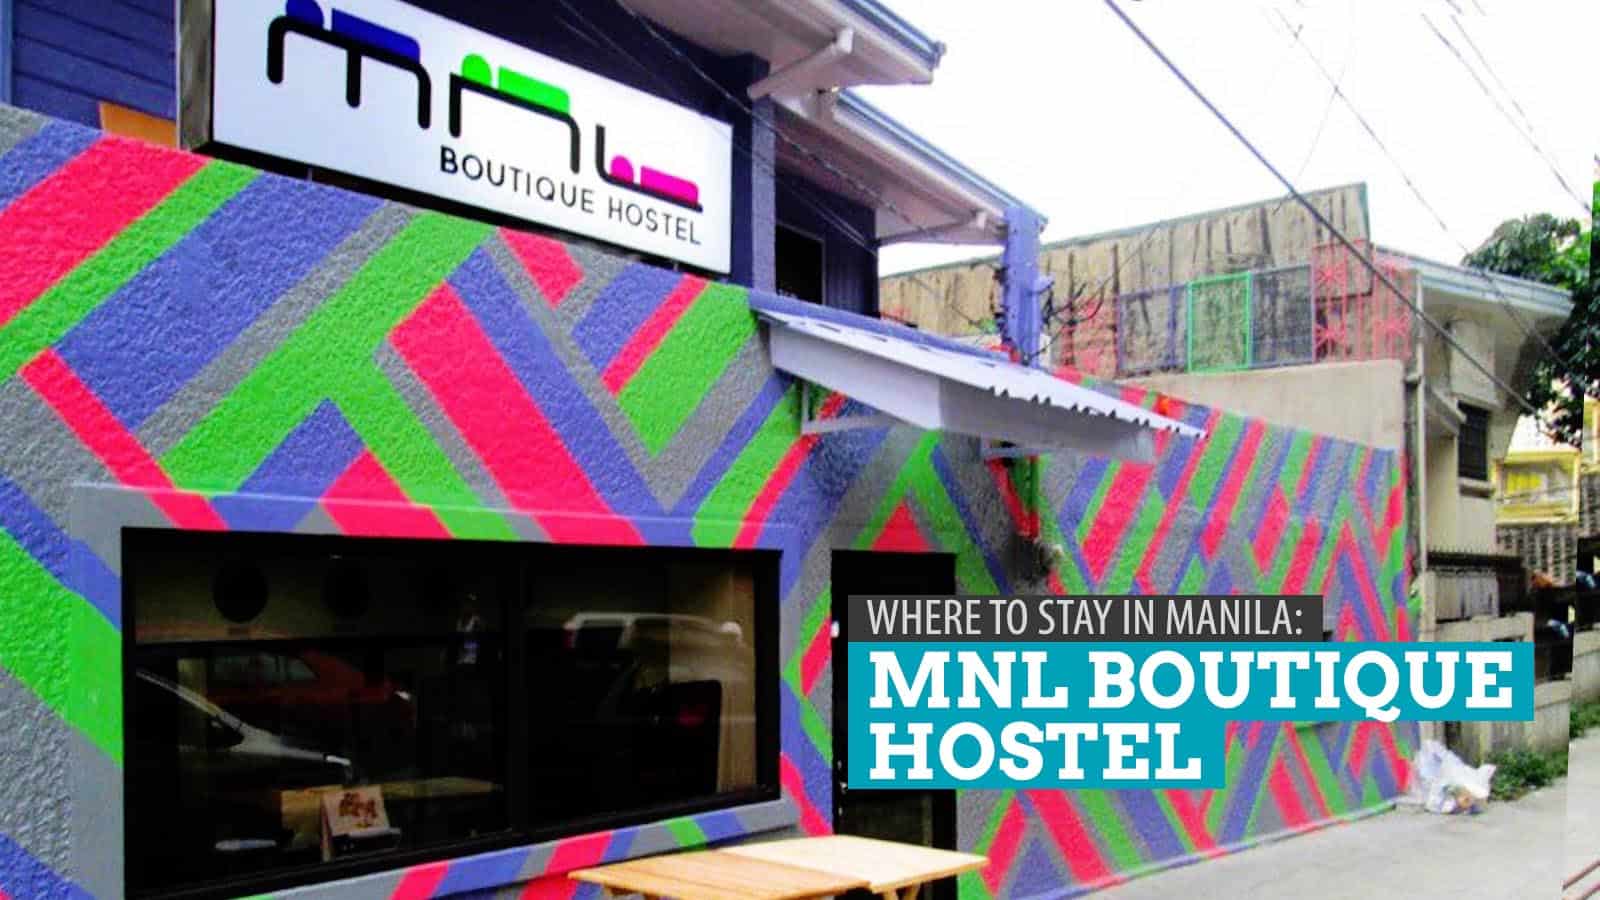 MNL Boutique Hostel: Where to Stay in Makati, Philippines